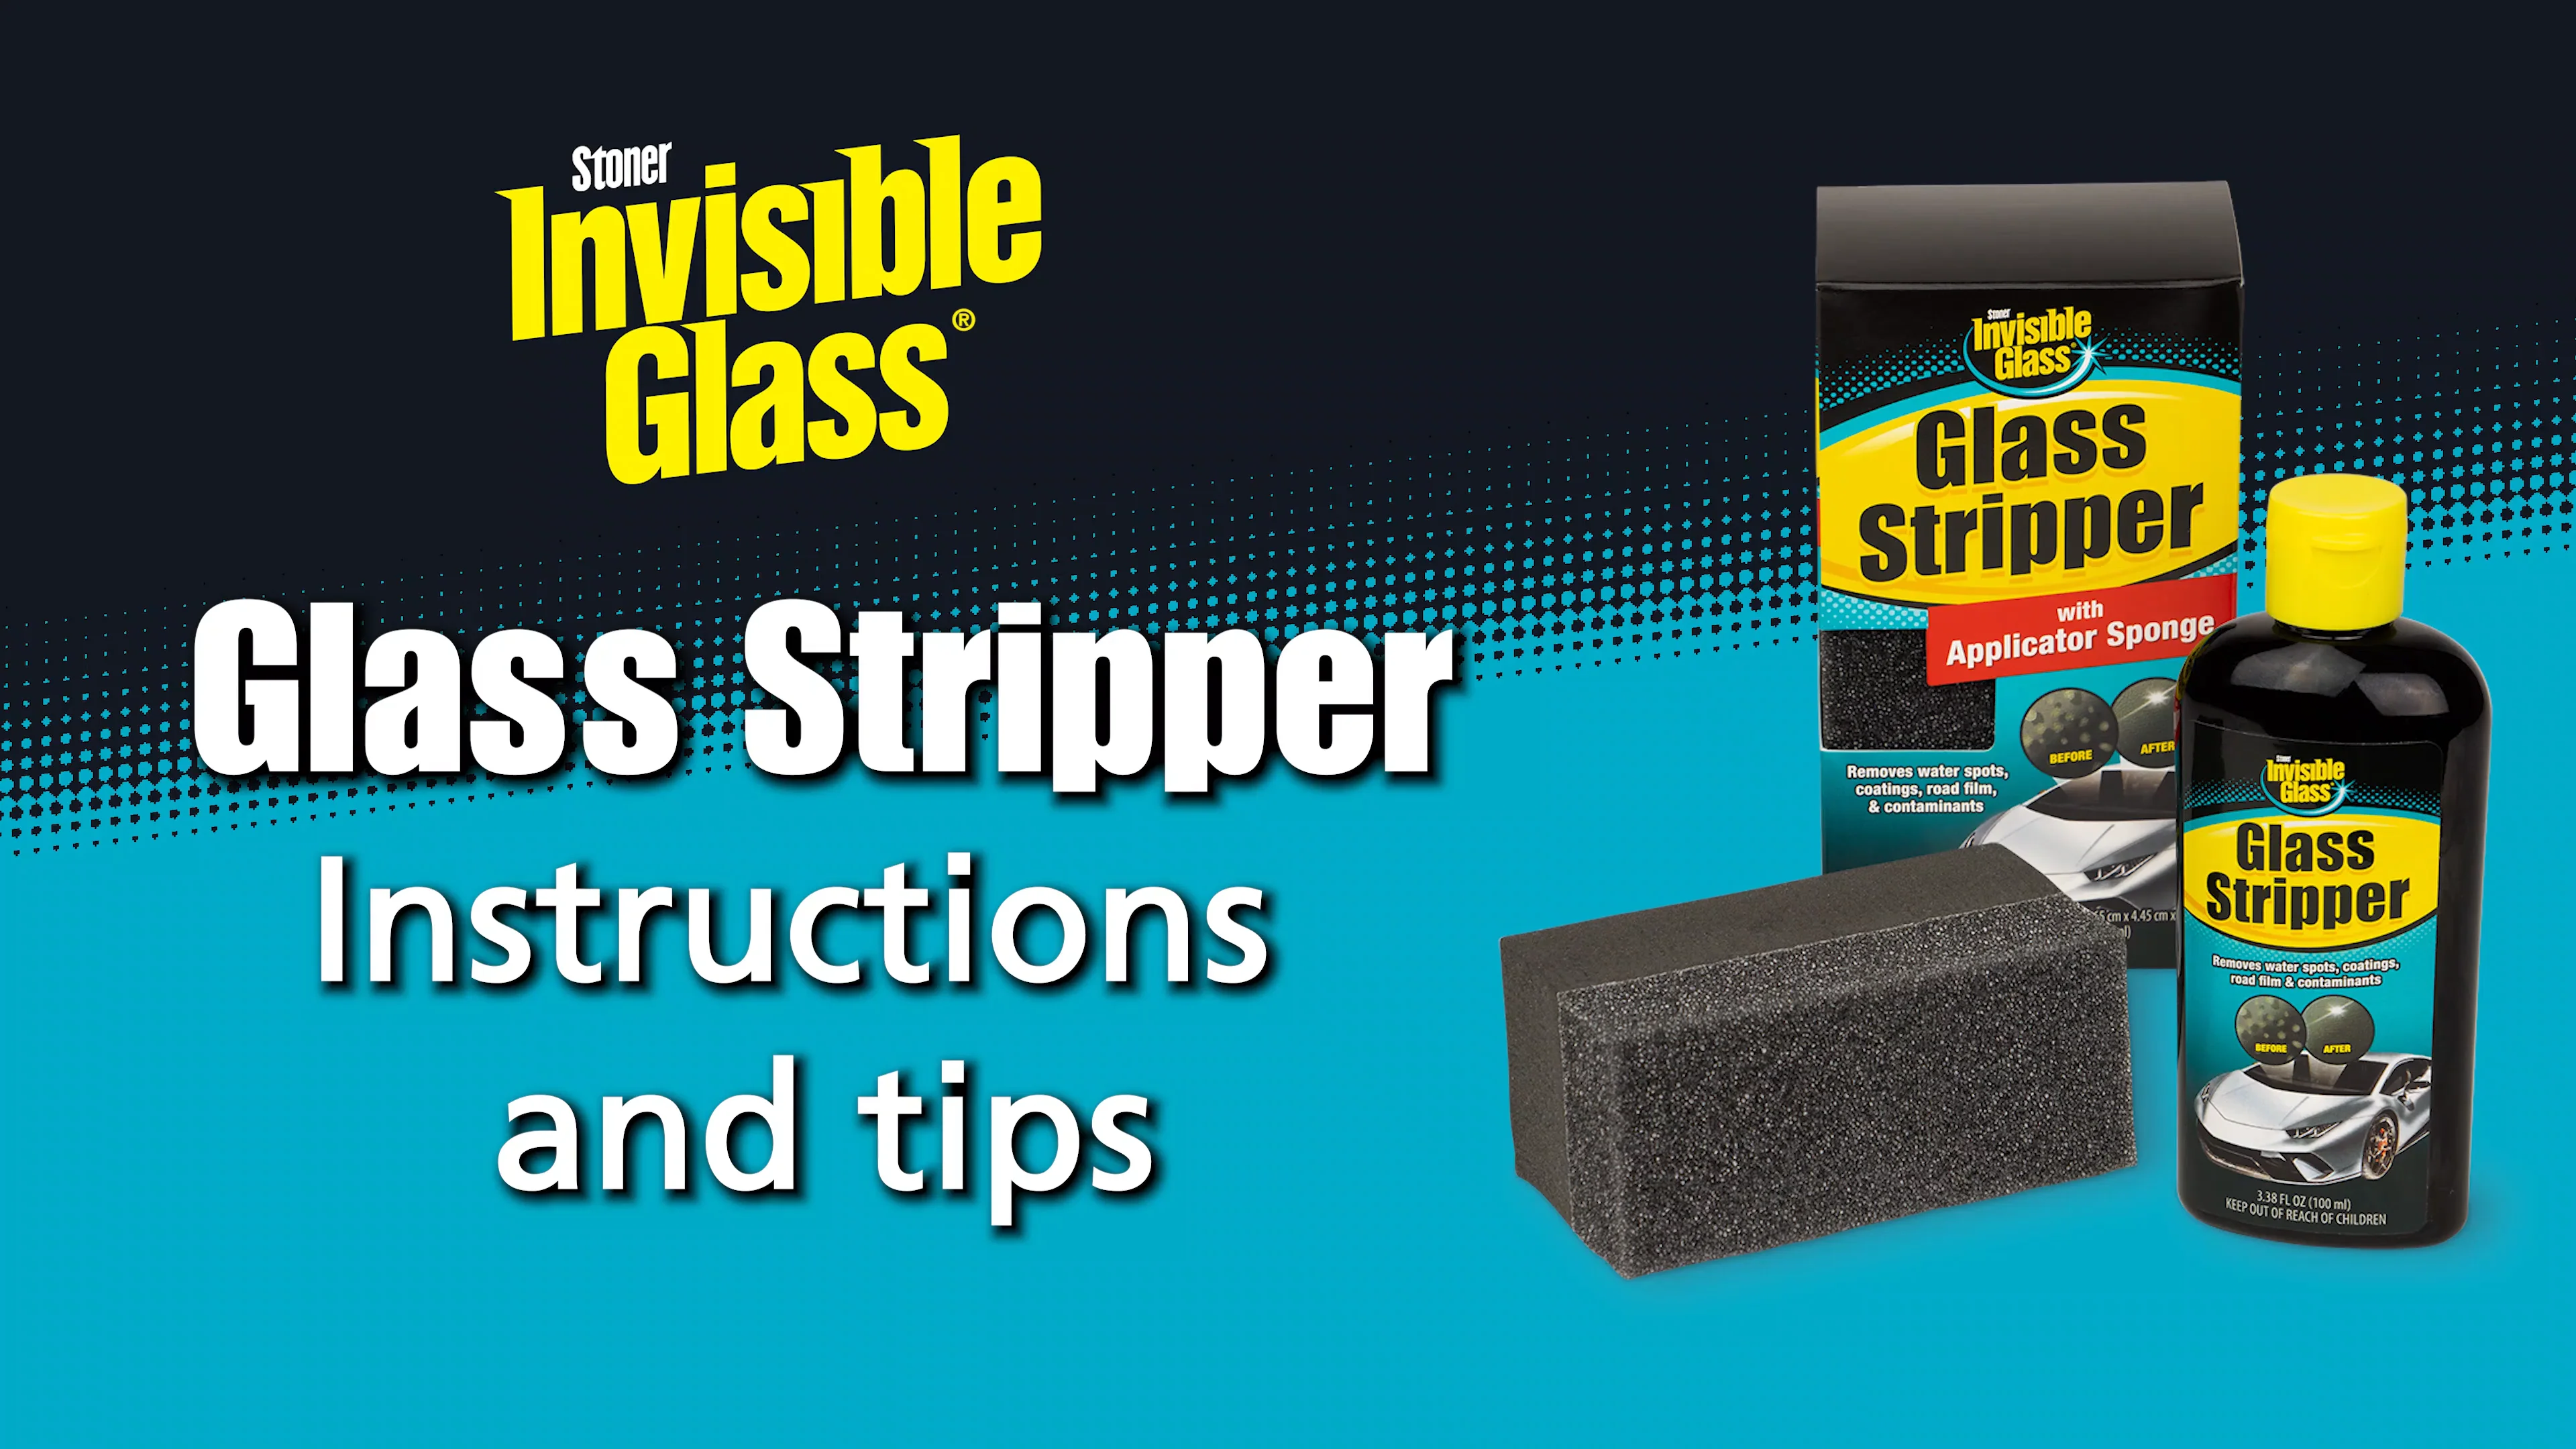 How To Remove Glass Water Spots From Your Car Windows - Invisible Glass Glass  Stripper 